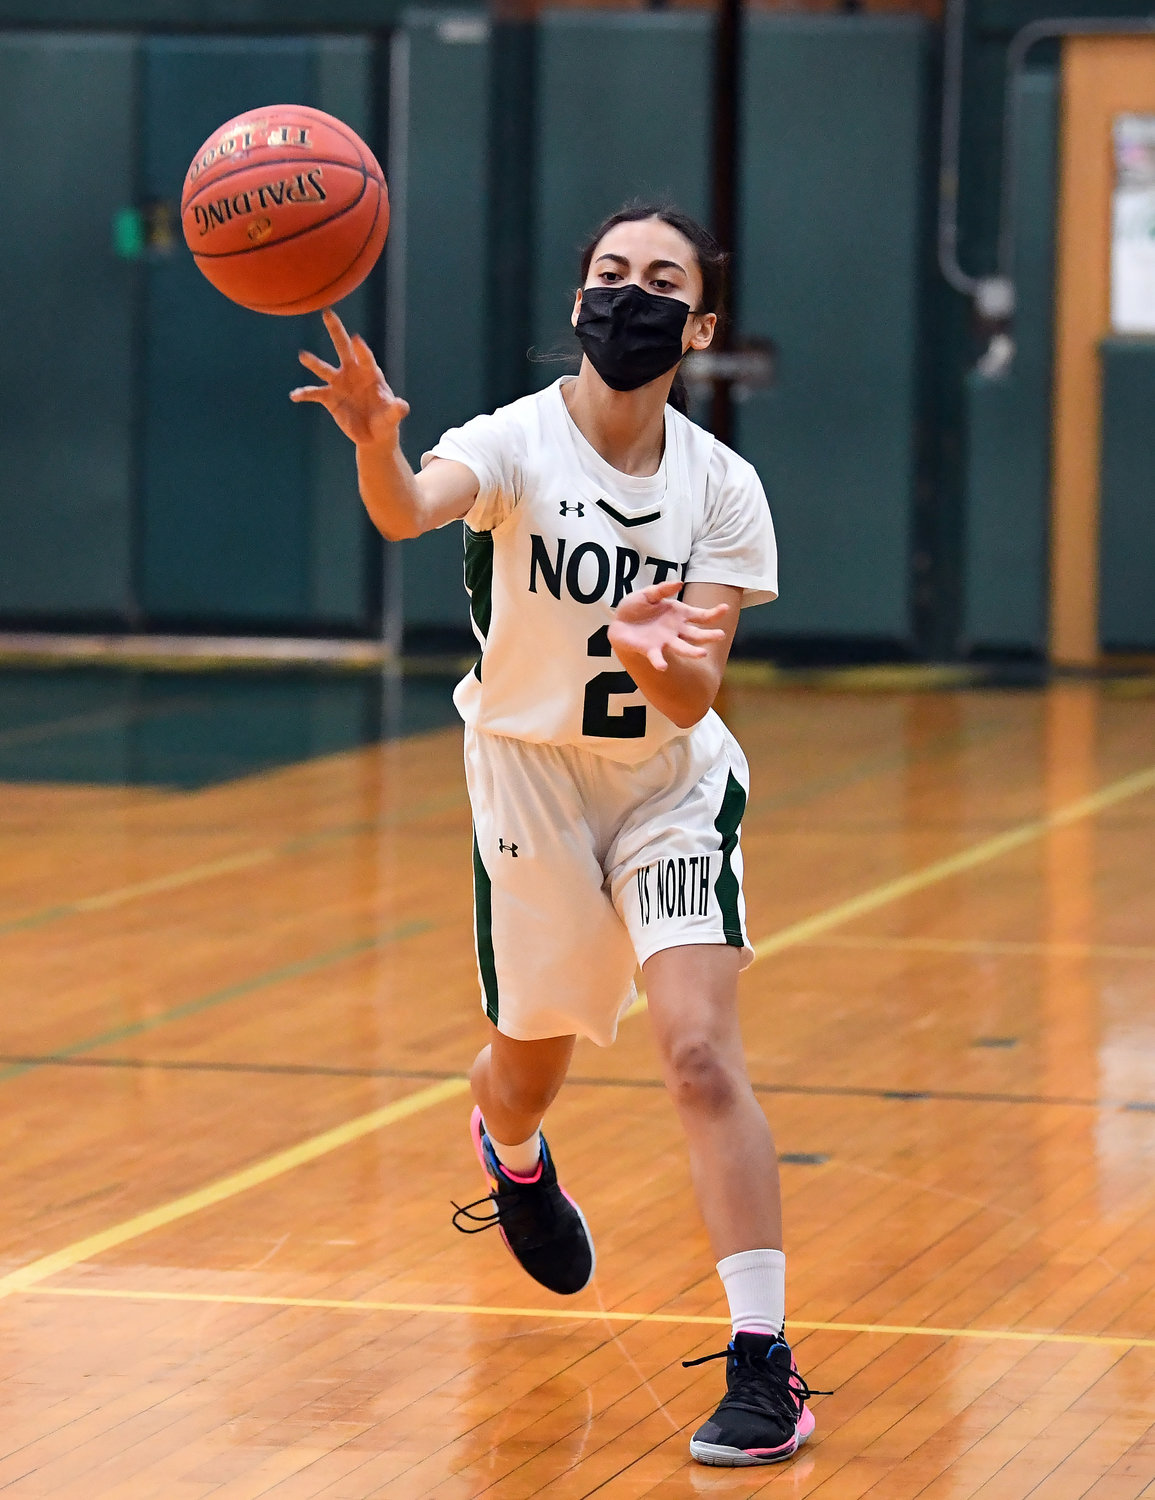 Sophomore Alyanna Nadal scored 10 points on Jan. 20 as the Spartans improved to 5-7 overall with a non-conference victory over Glen Cove.